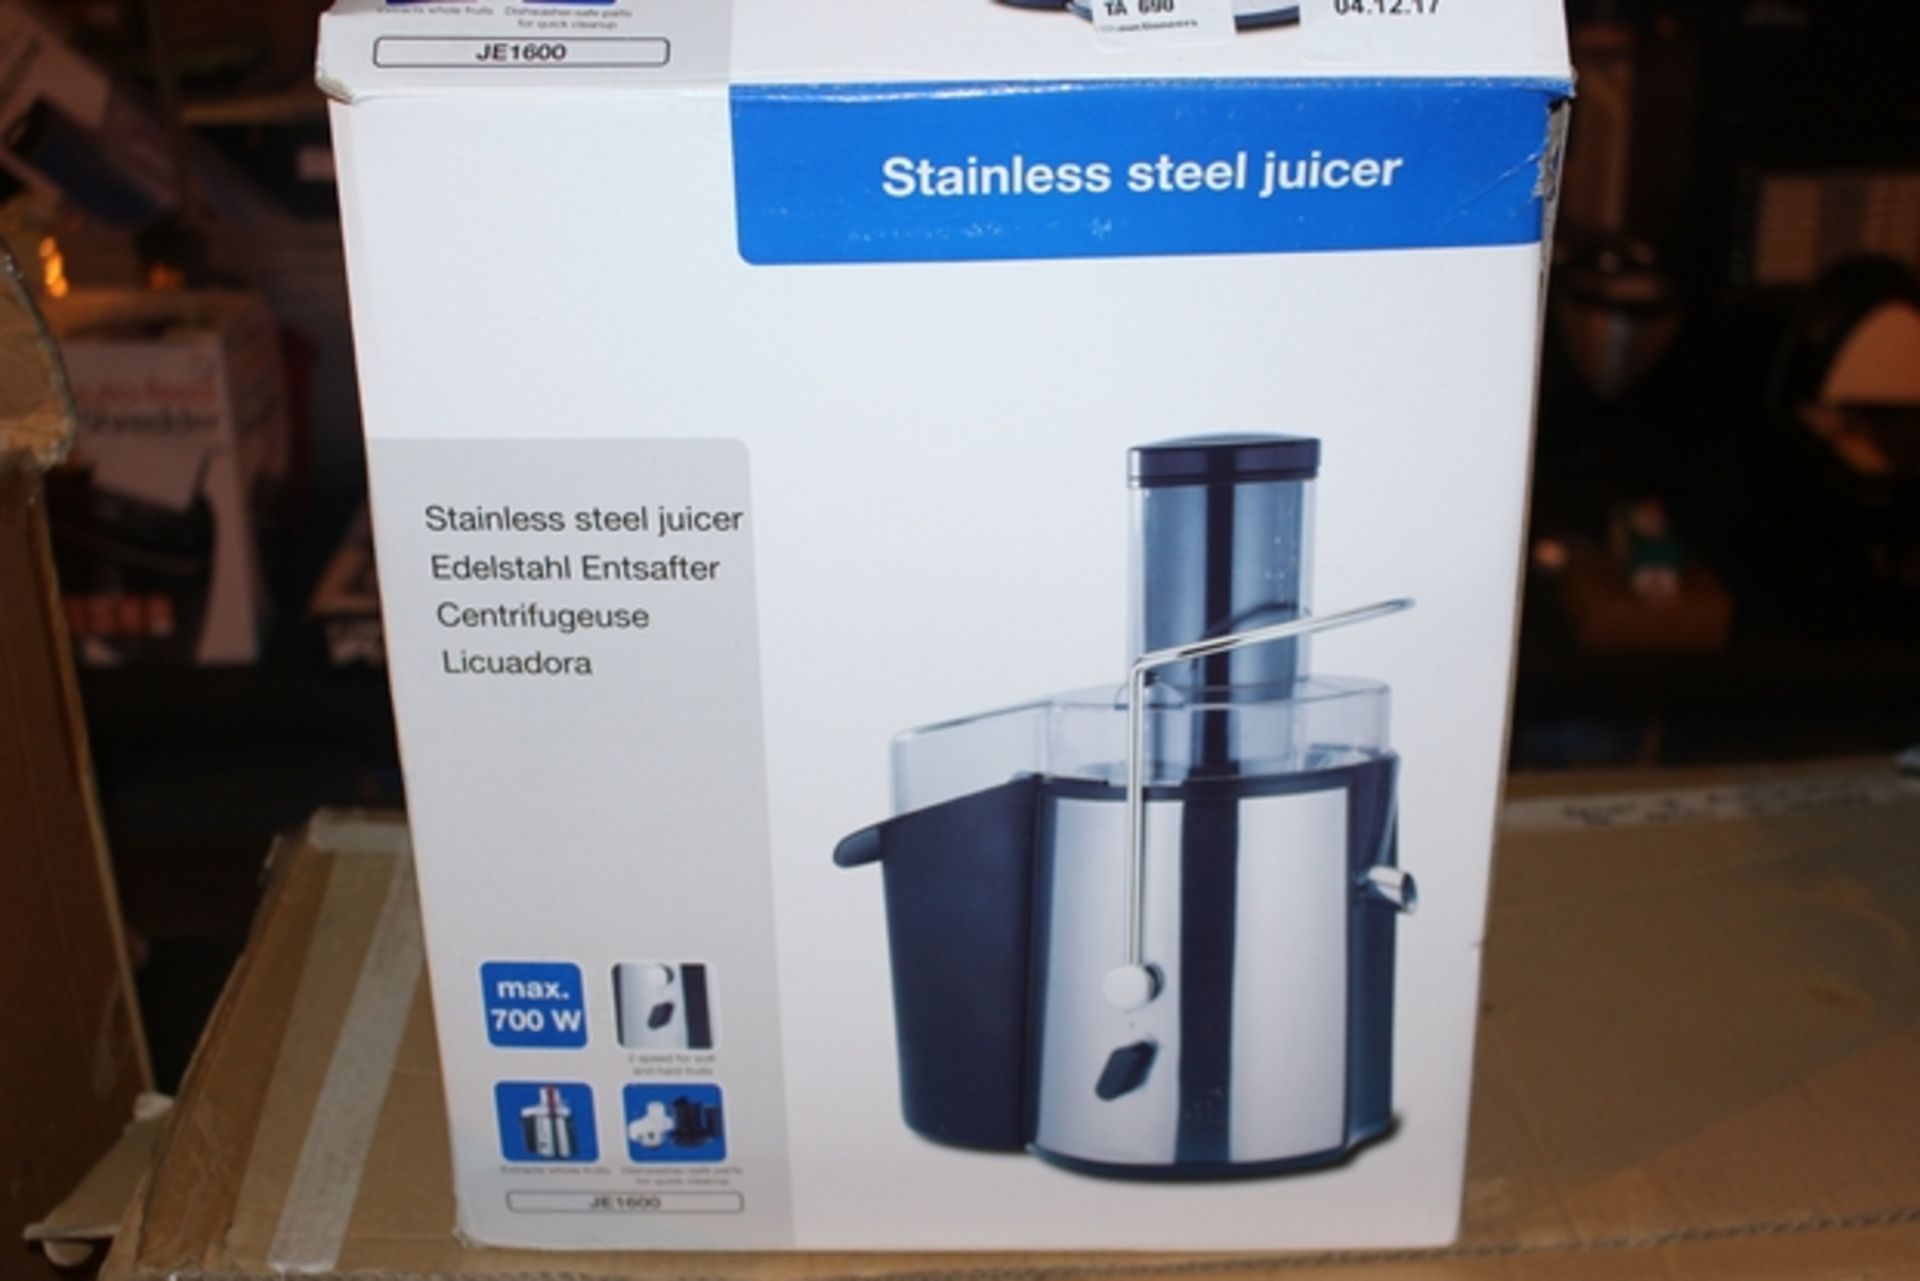 1X BOXED STAINLESS STEEL JUICER (DS-MAK-LEIC) (04/12/17)